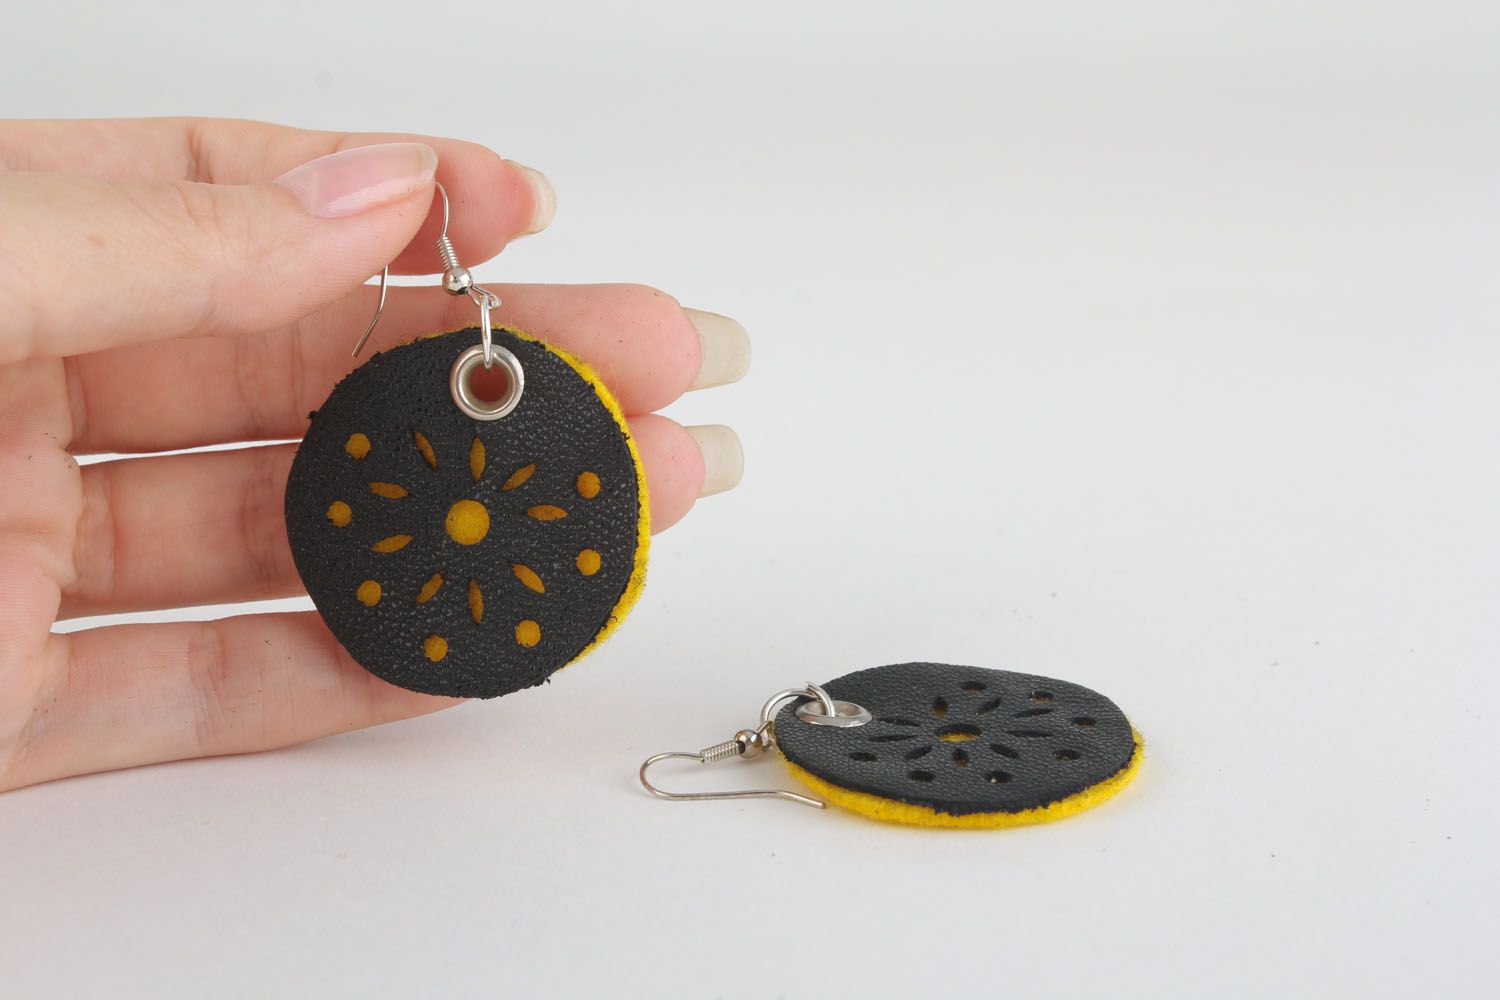 Women's earrings made of leather and felt photo 4